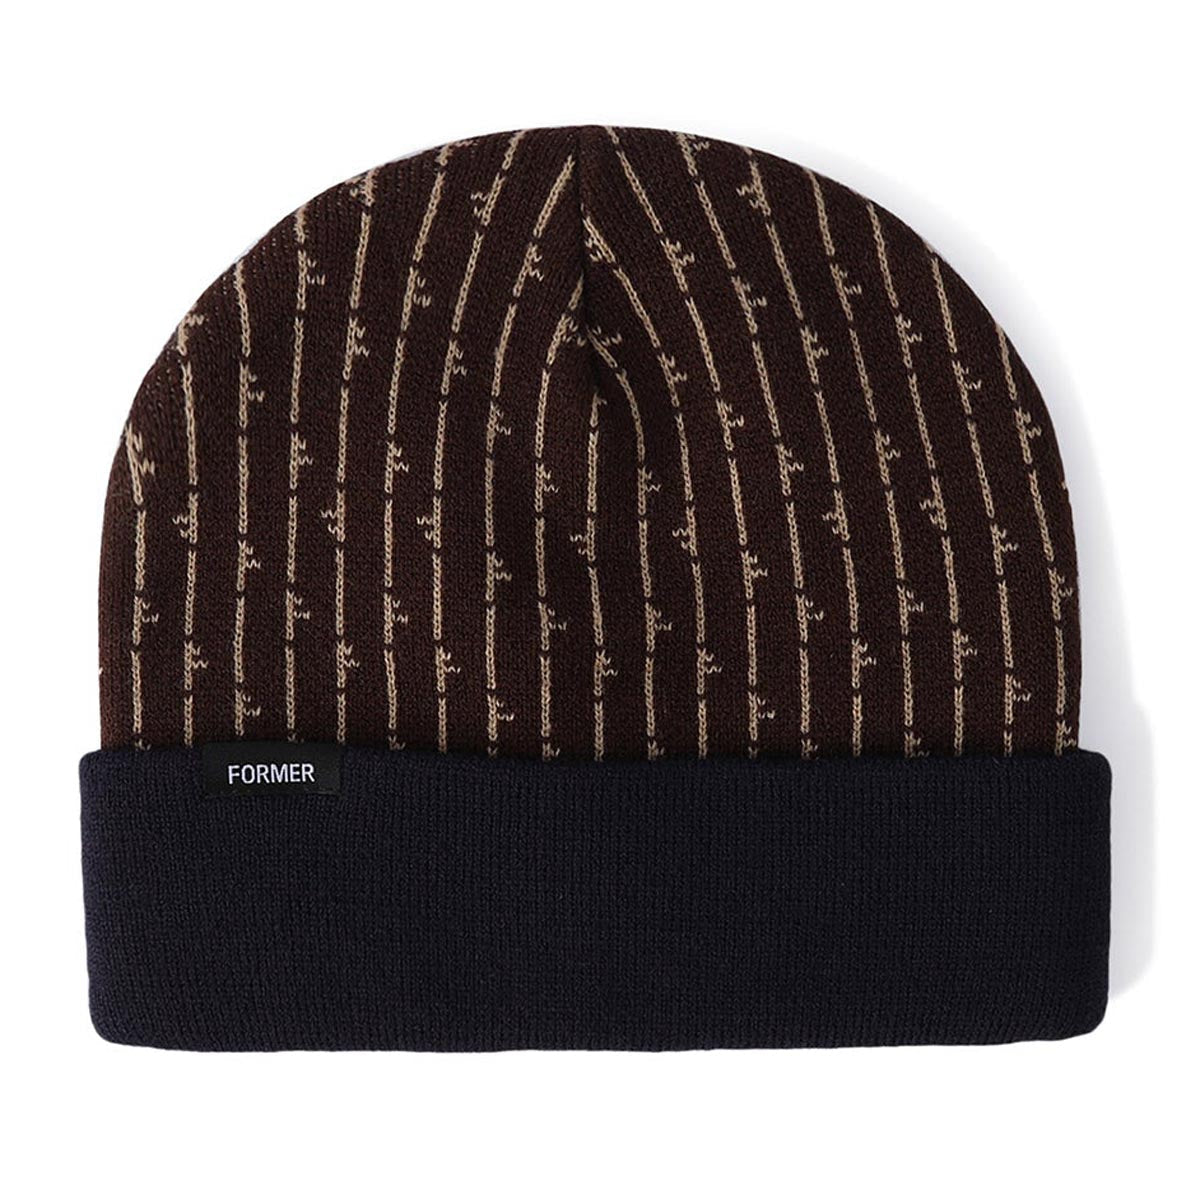 Former Fuse Beanie - Brown Light Brown image 1